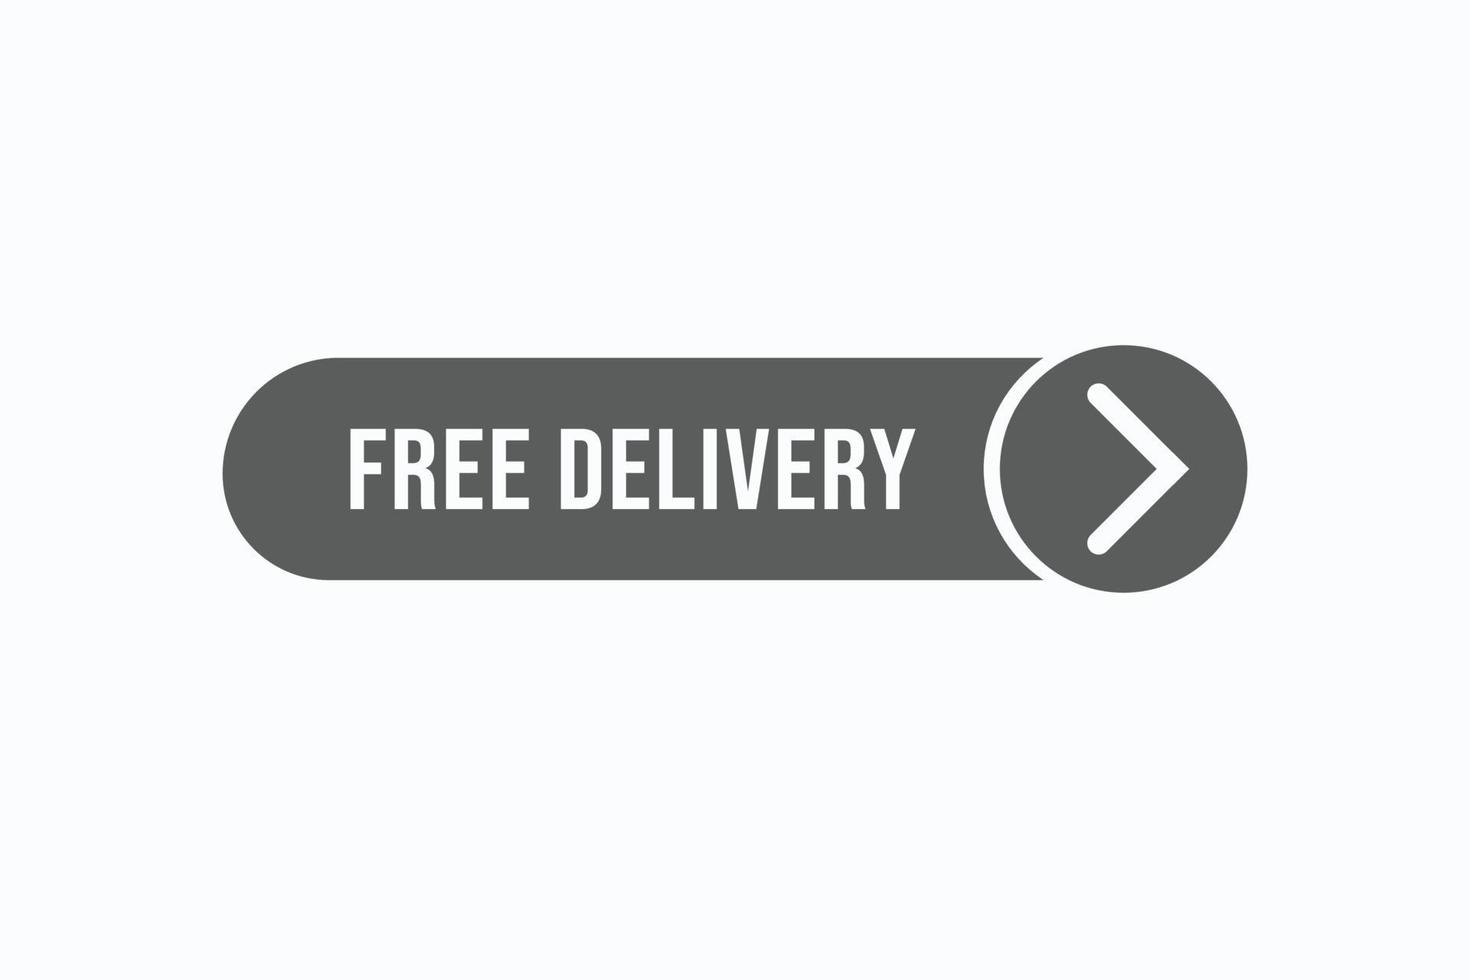 free delivery  button vectors. sign label speech bubble free delivery vector